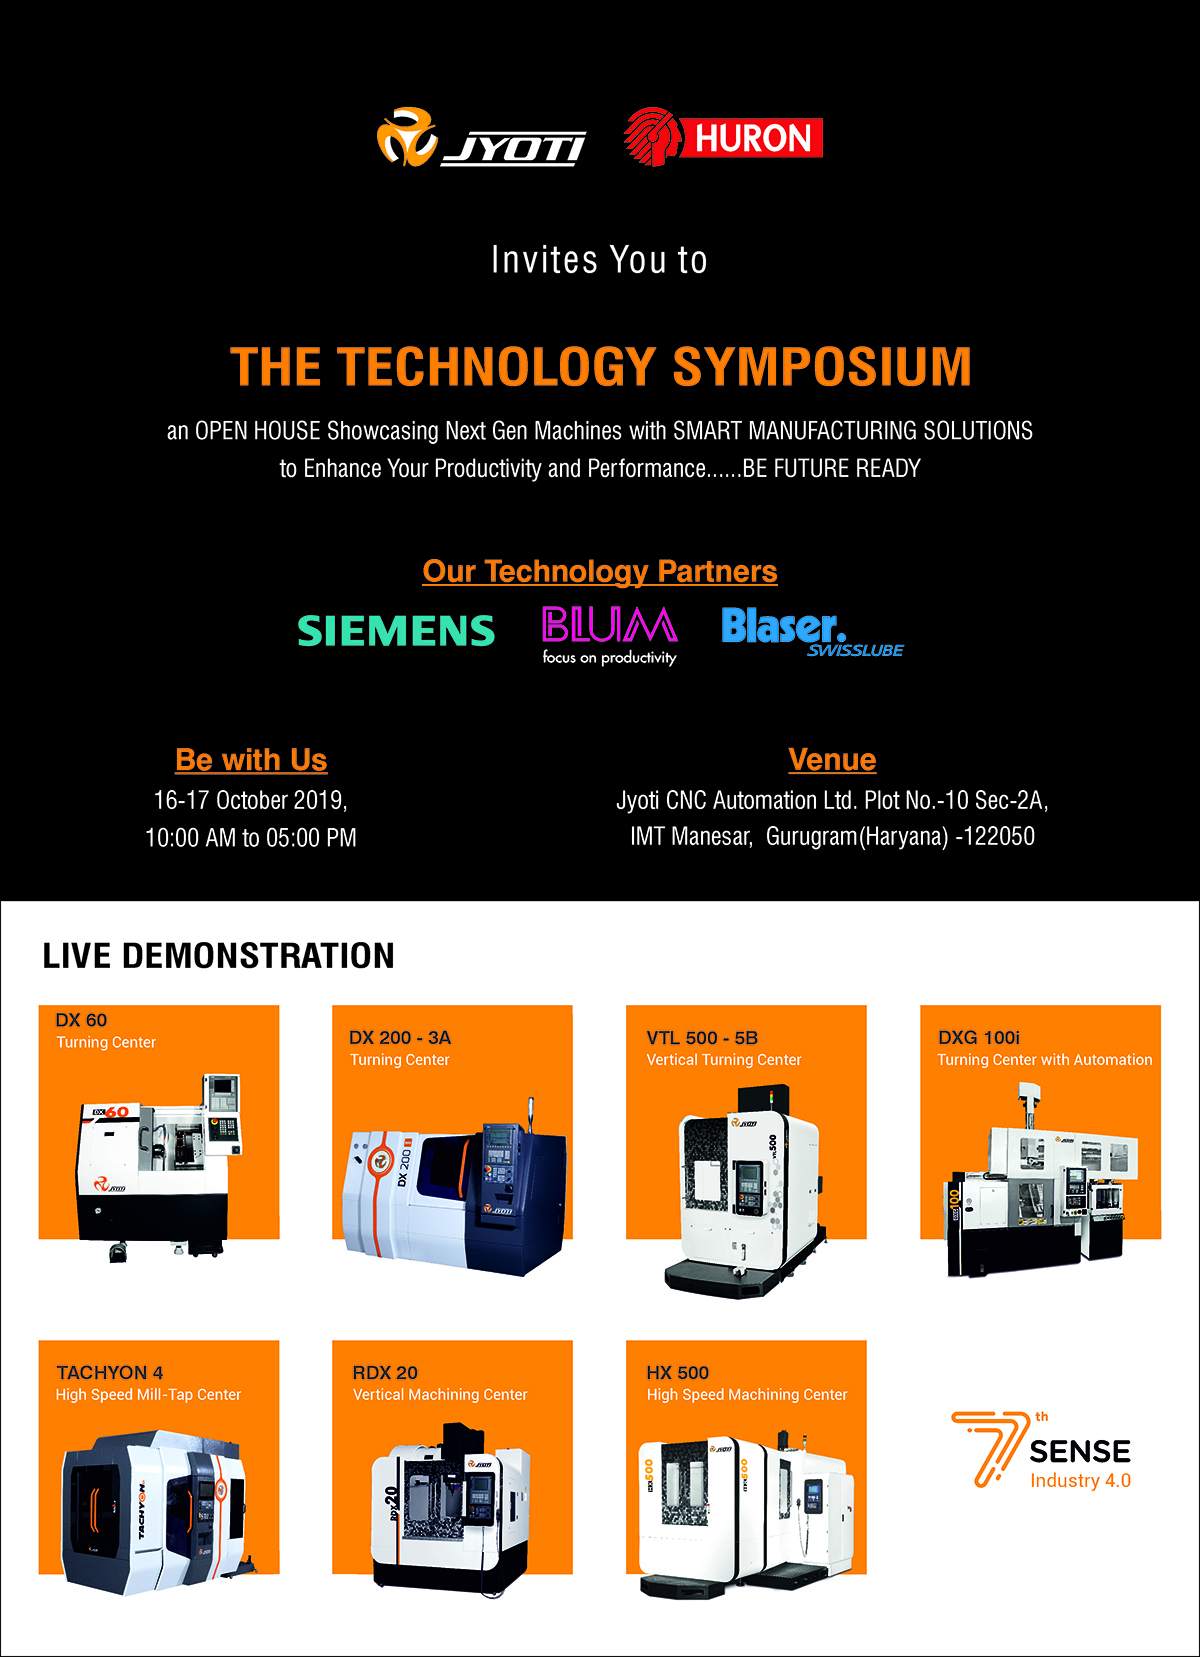 Technology Symposium, Live Demonstration Show at our Technology Center, Gurugram